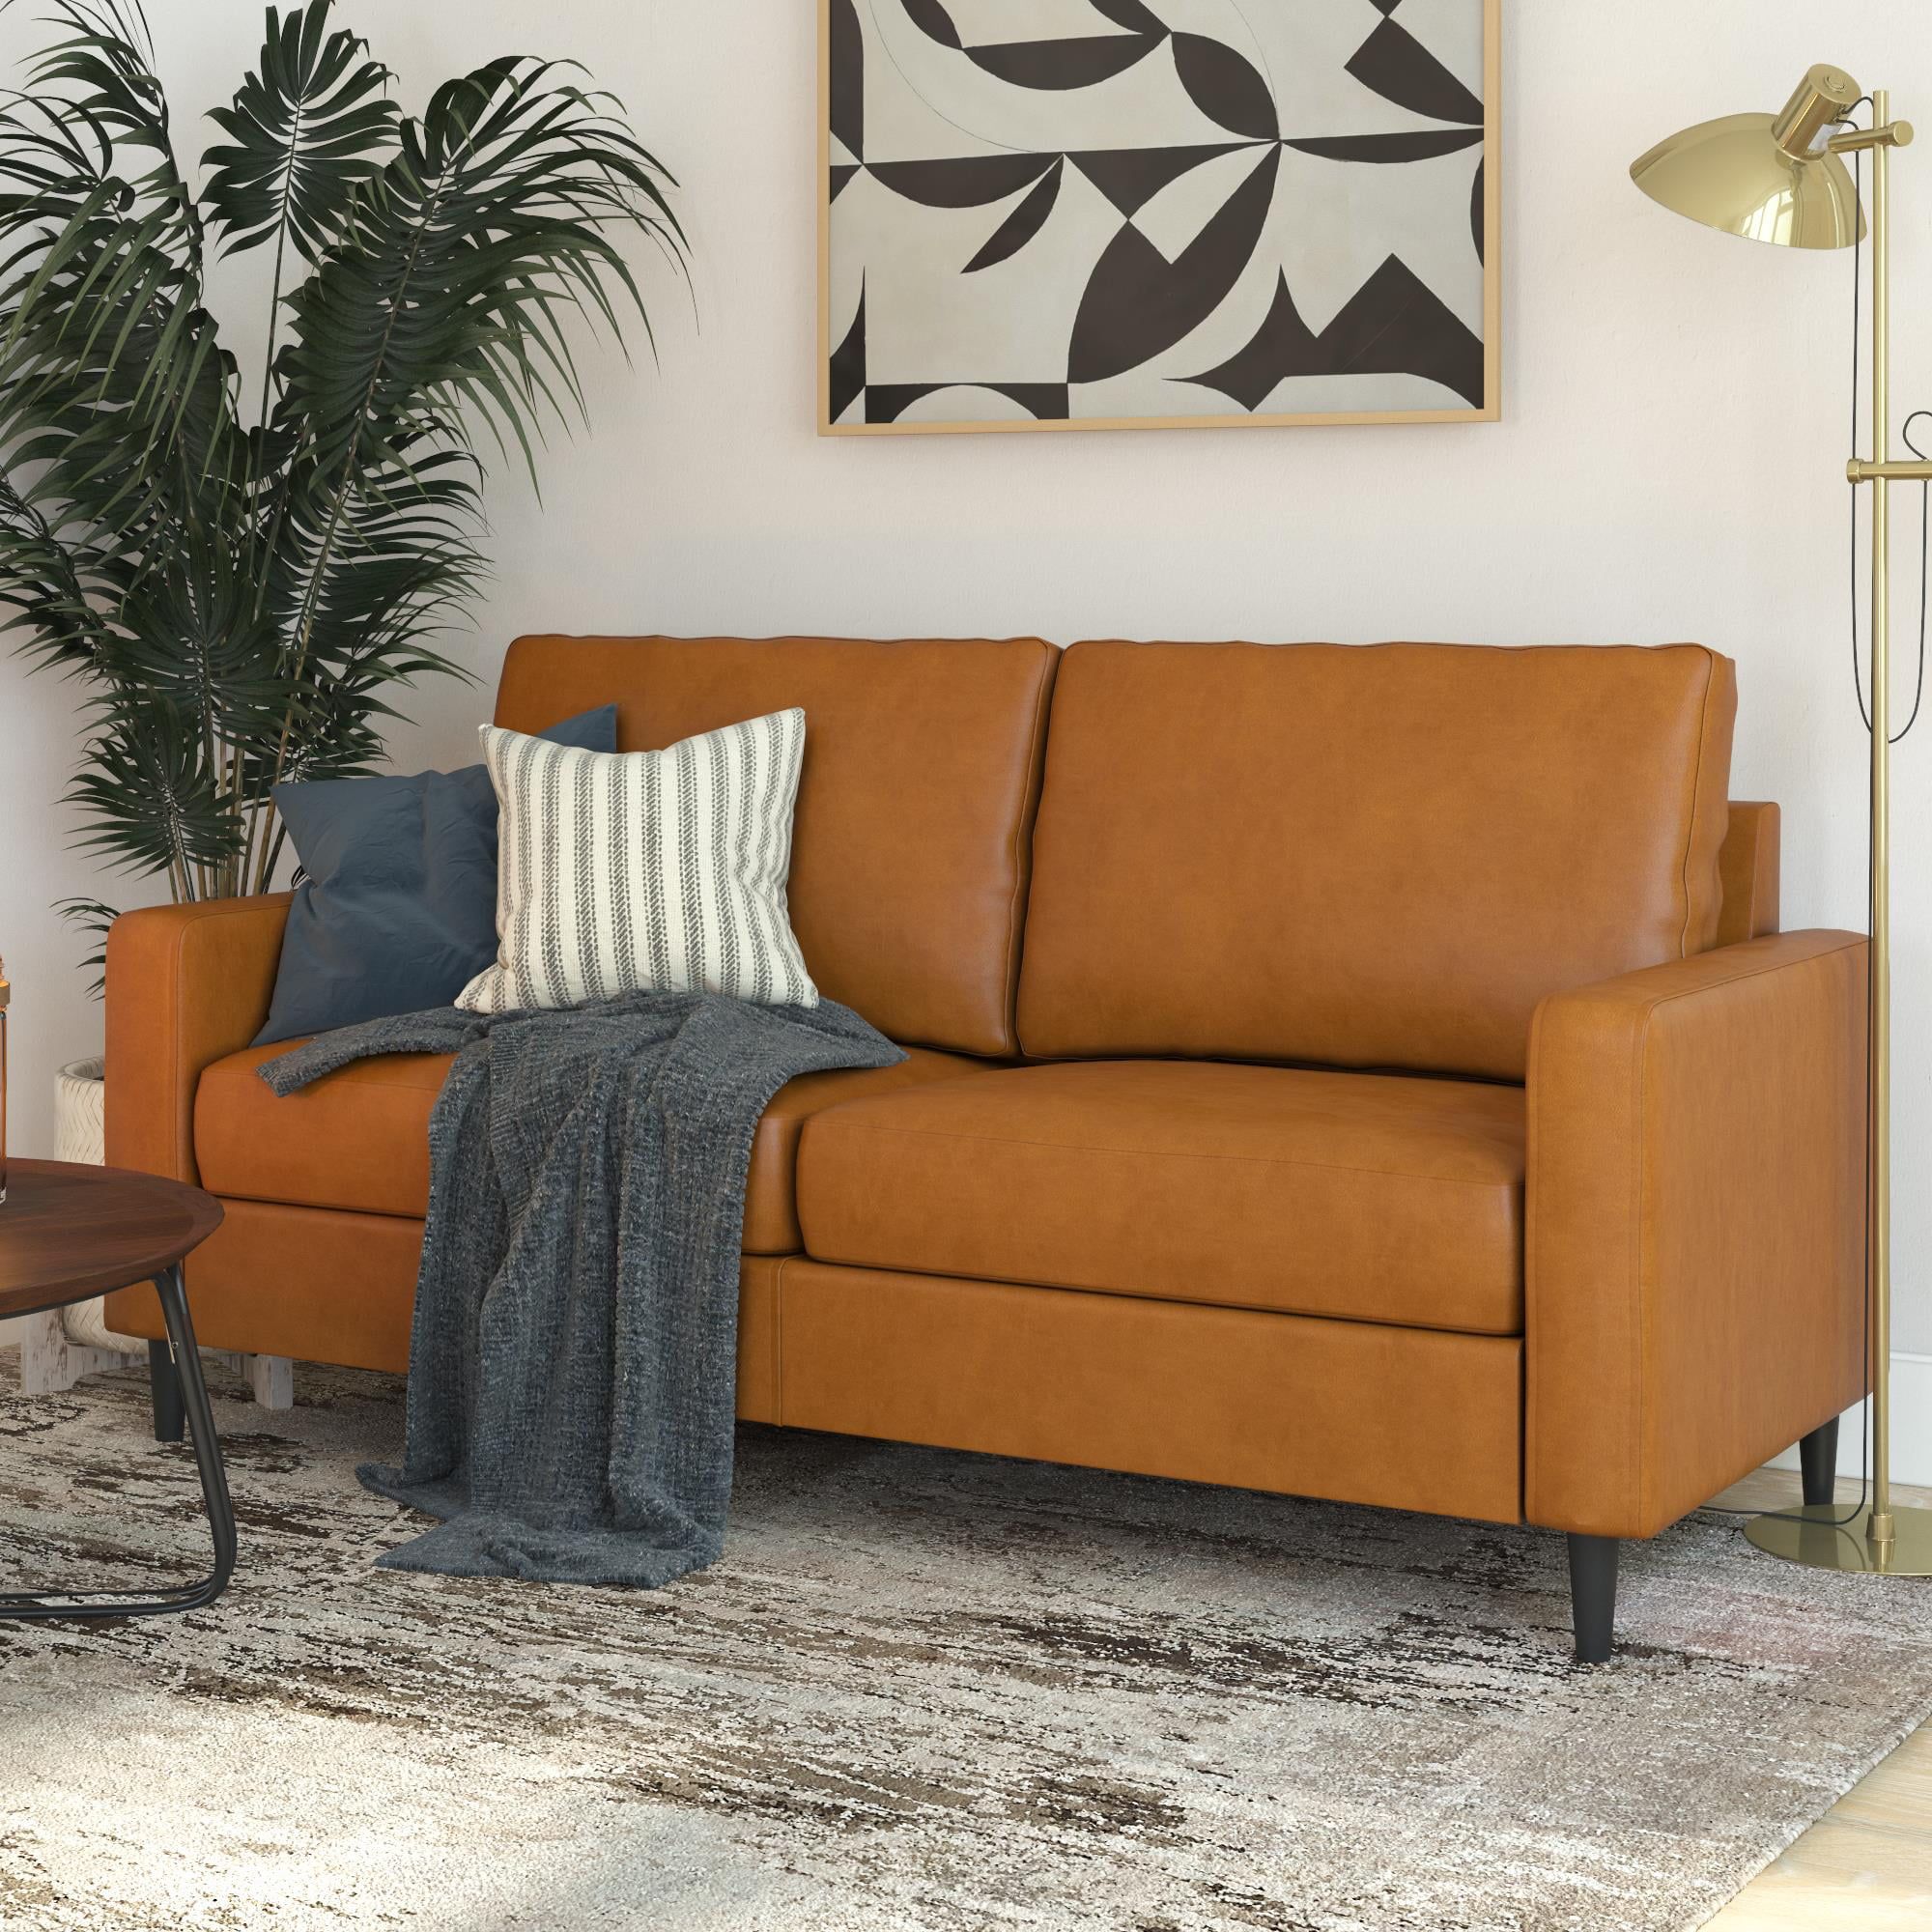 Dhp Connor Modern Sofa, Small Space Living Room Furniture, Camel Faux Throughout Faux Leather Sofas (View 8 of 21)